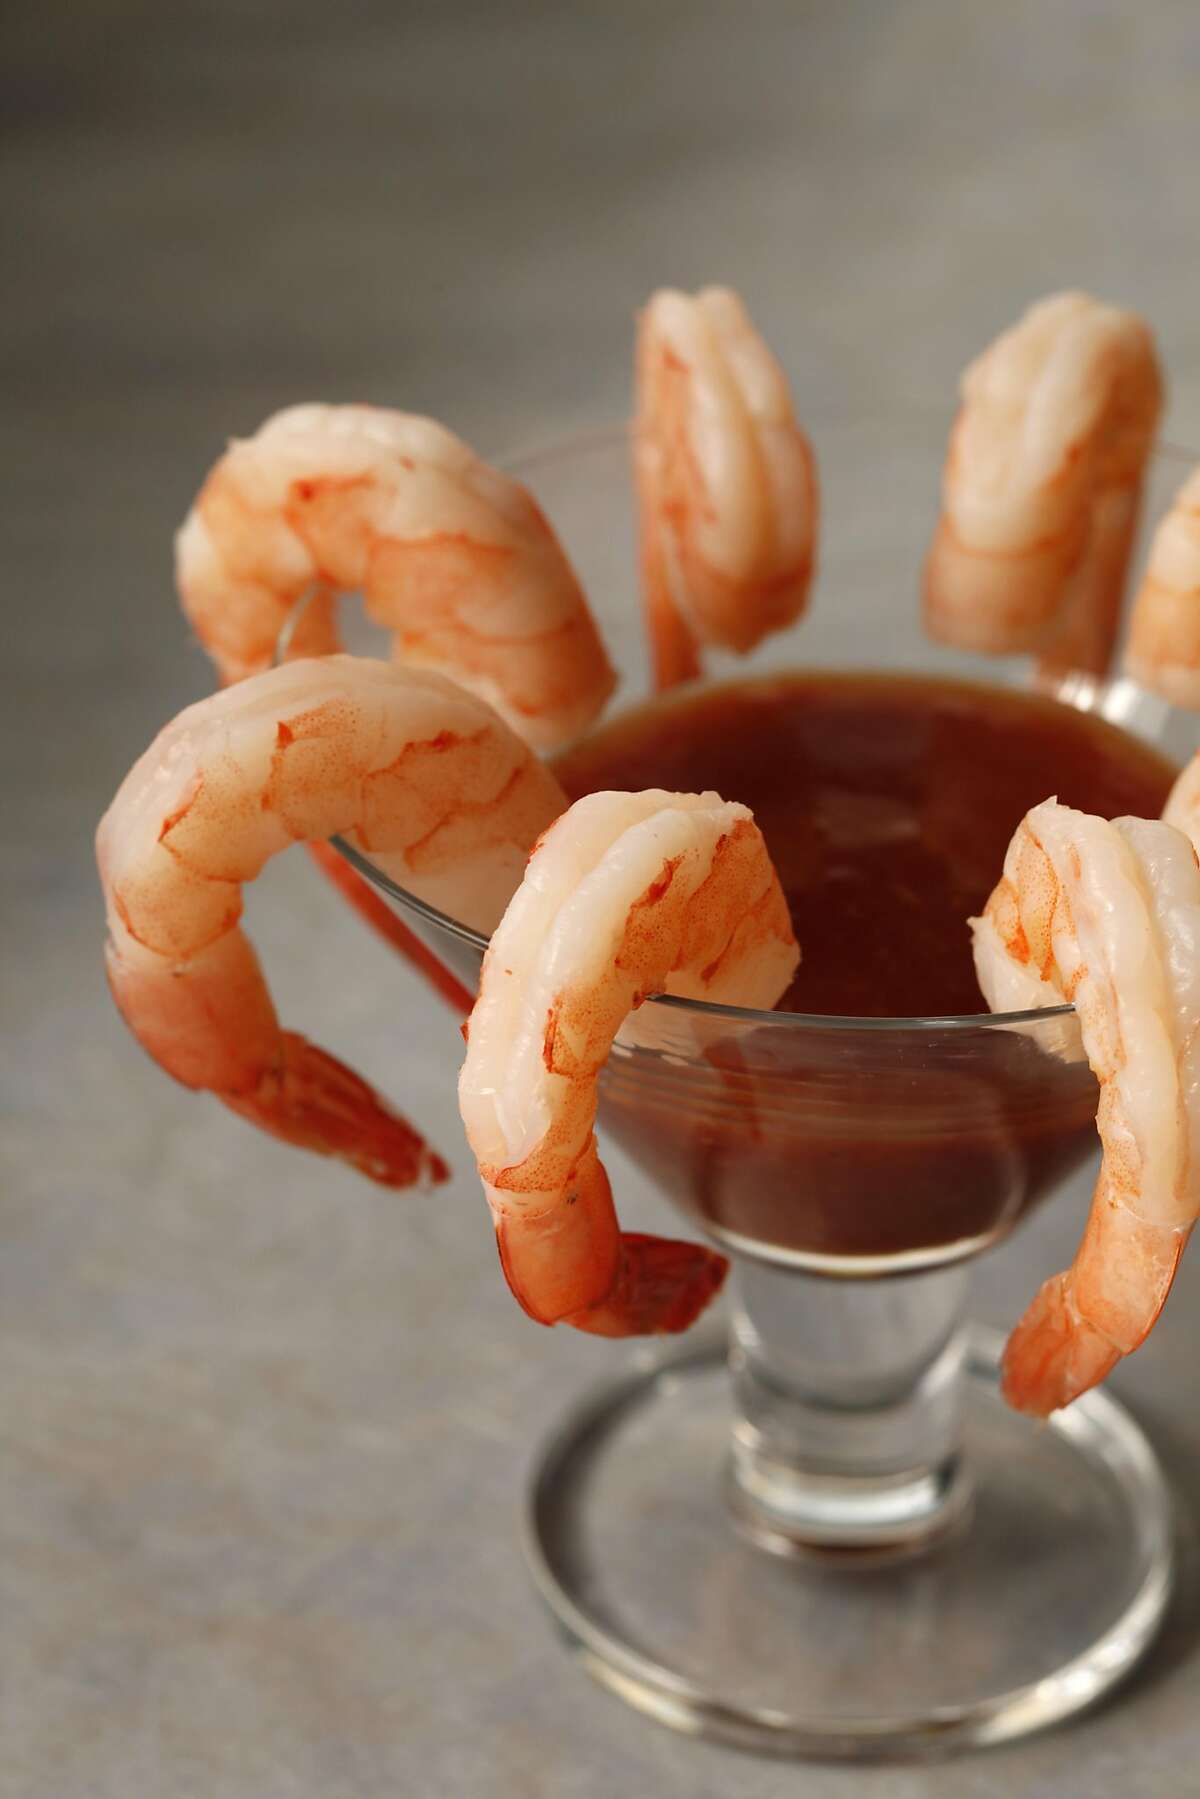 Big 4's vodka-soaked shrimp with Blood May cocktail sauce as seen in San Francisco, Calif., on November 3, 2010. Food styled by Janny Hu.